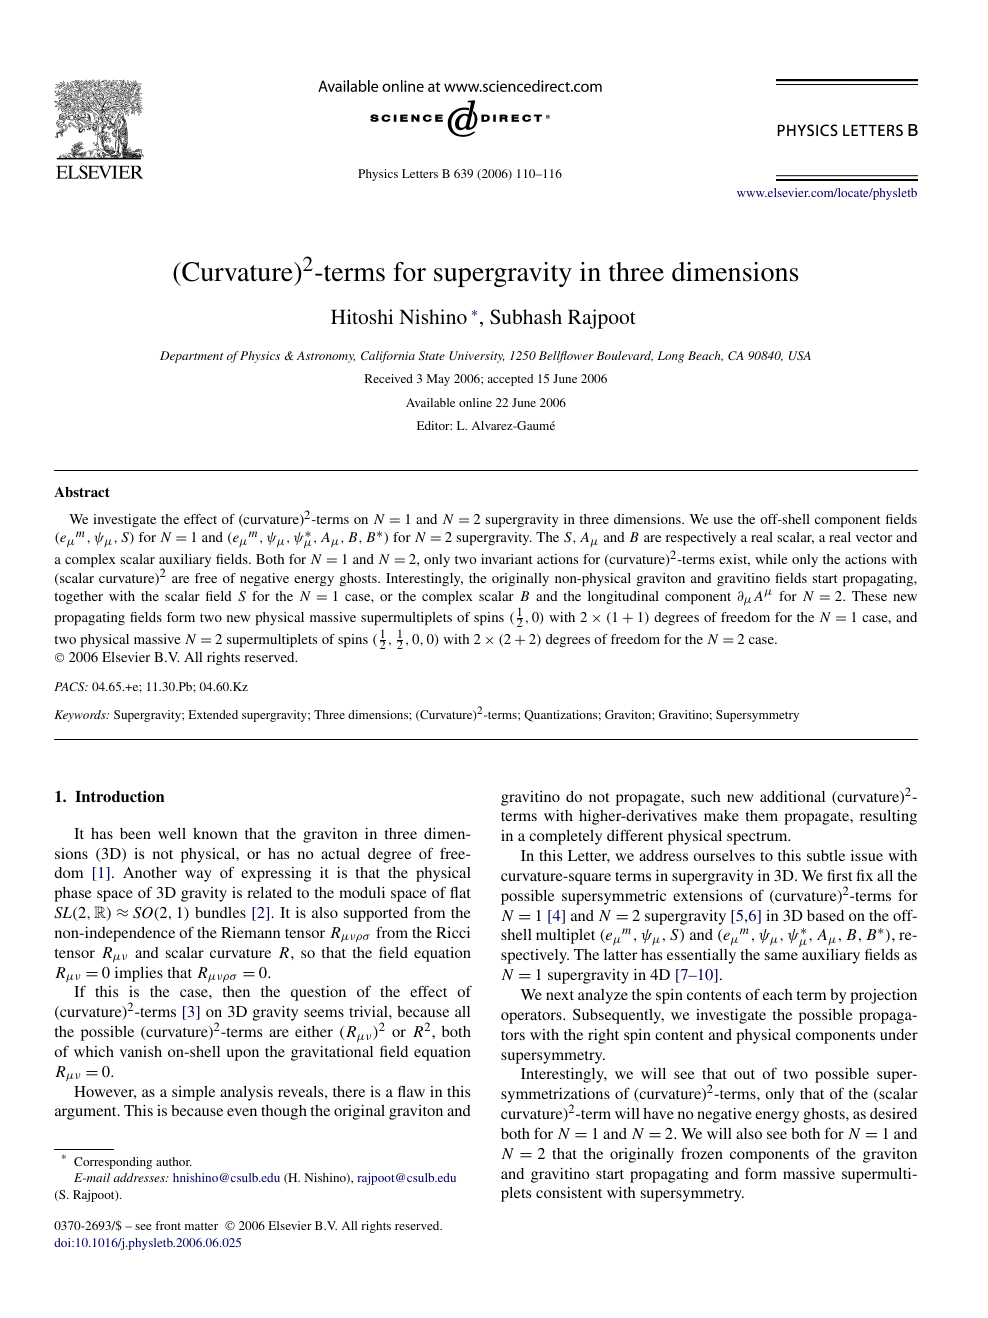 Curvature 2 Terms For Supergravity In Three Dimensions Topic Of Research Paper In Physical Sciences Download Scholarly Article Pdf And Read For Free On Cyberleninka Open Science Hub